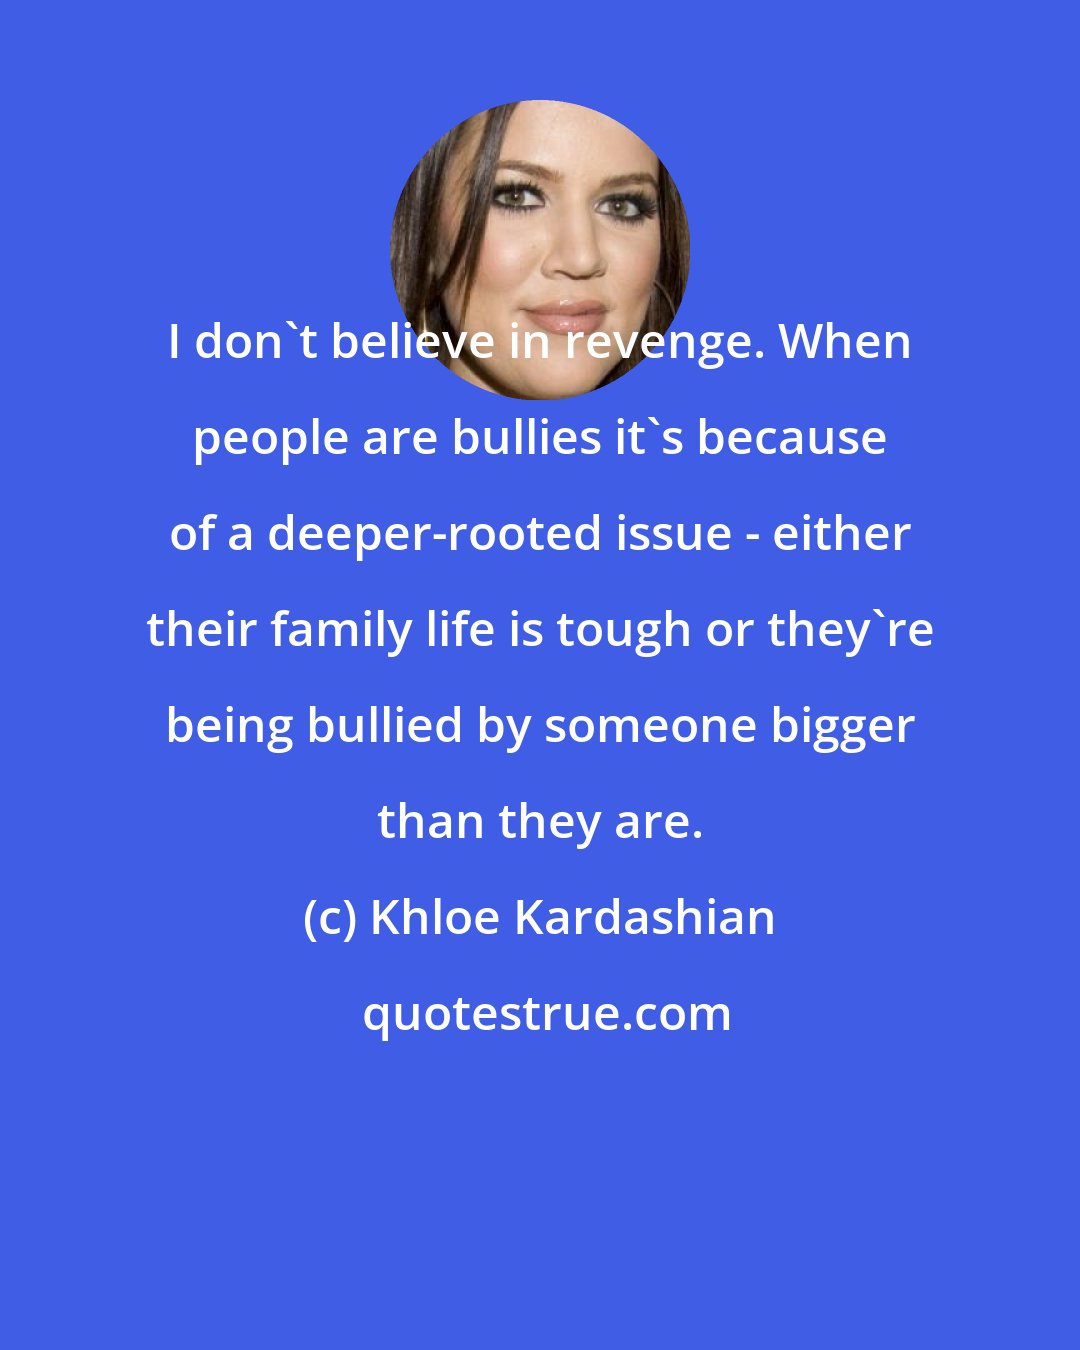 Khloe Kardashian: I don't believe in revenge. When people are bullies it's because of a deeper-rooted issue - either their family life is tough or they're being bullied by someone bigger than they are.